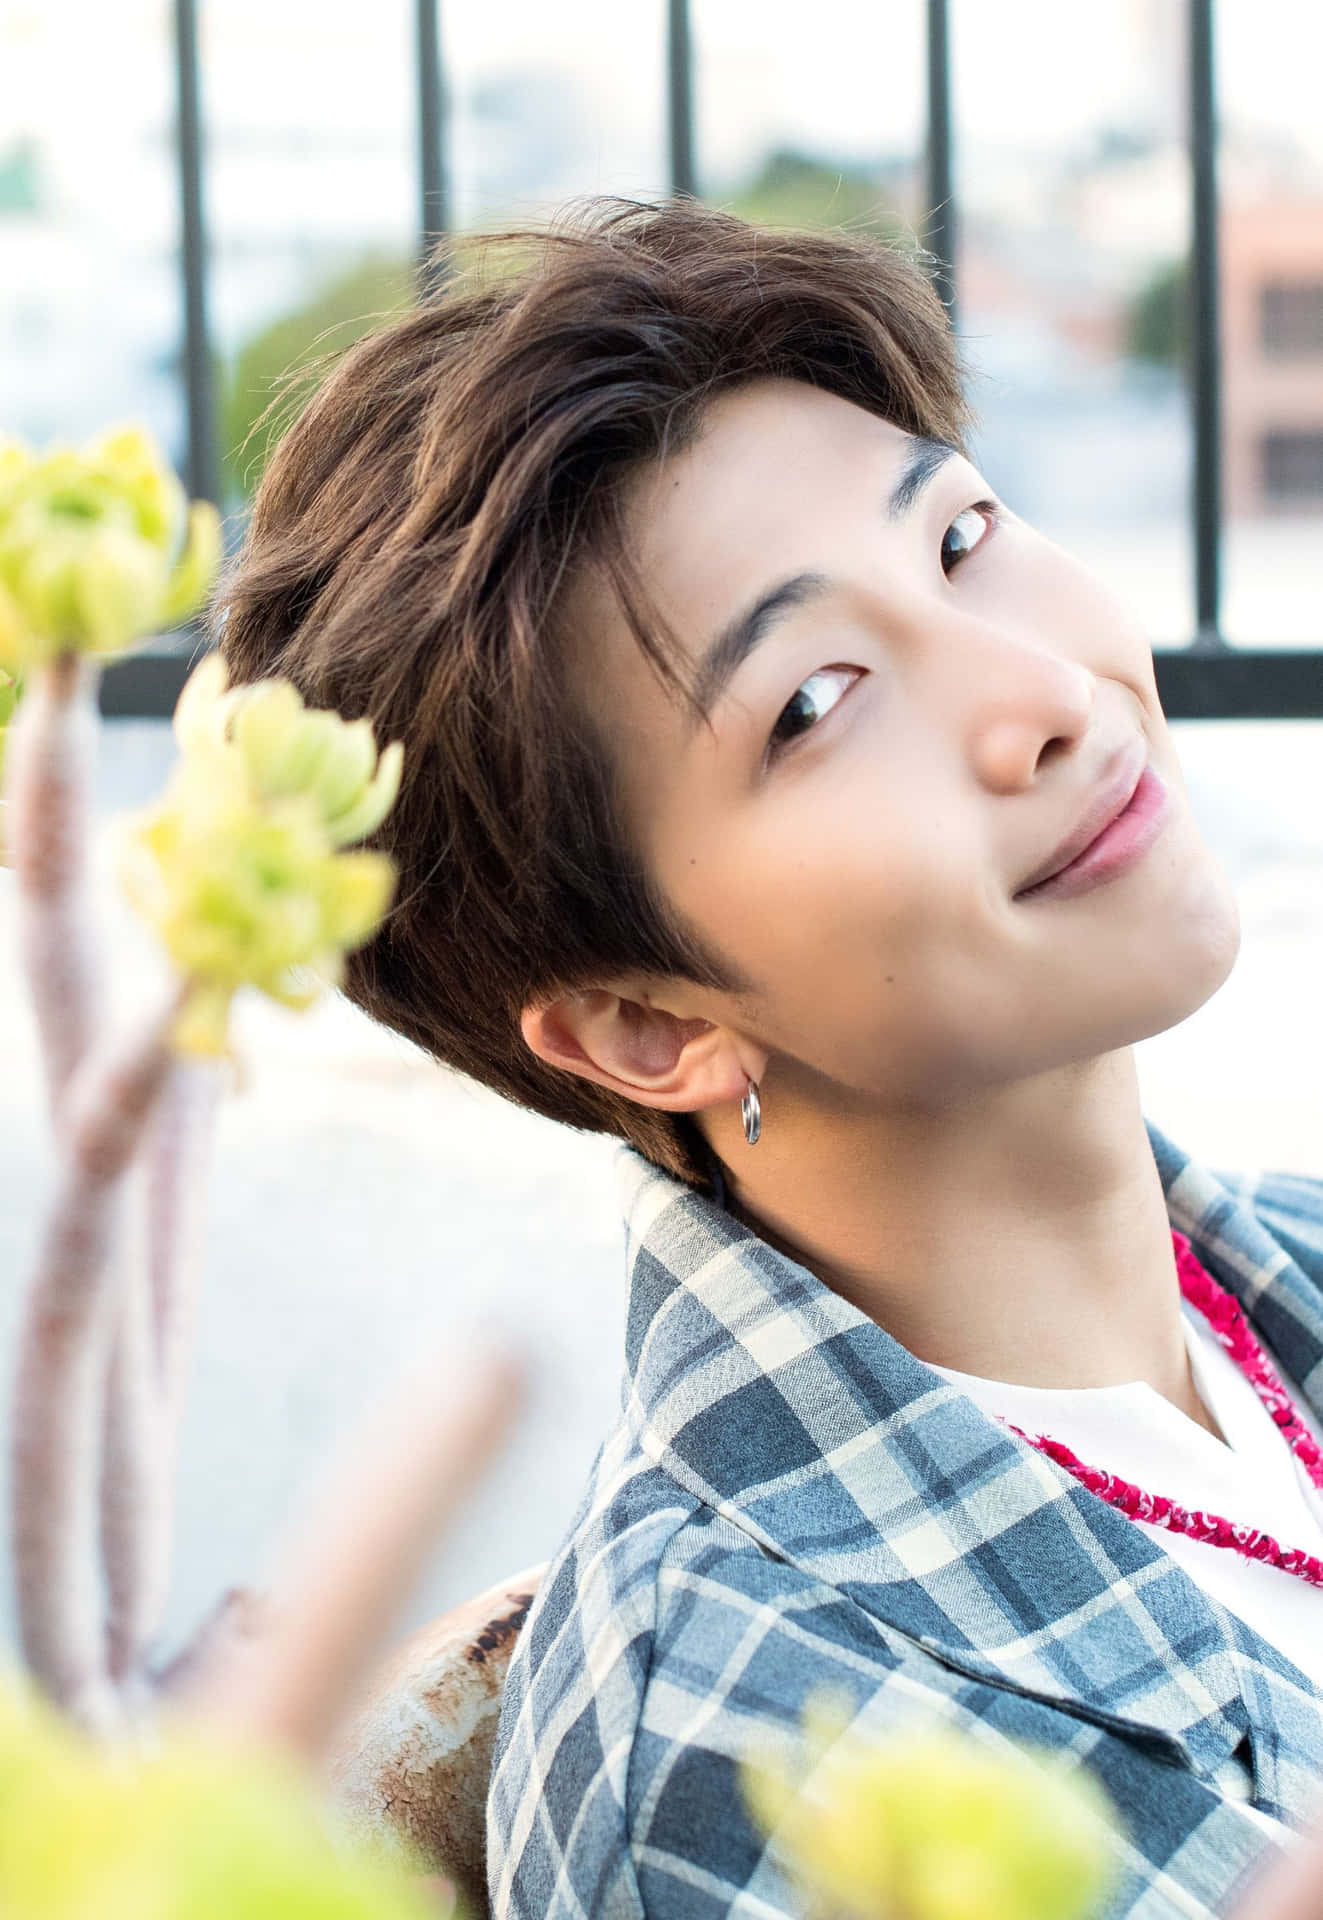 RM, the face of BTS